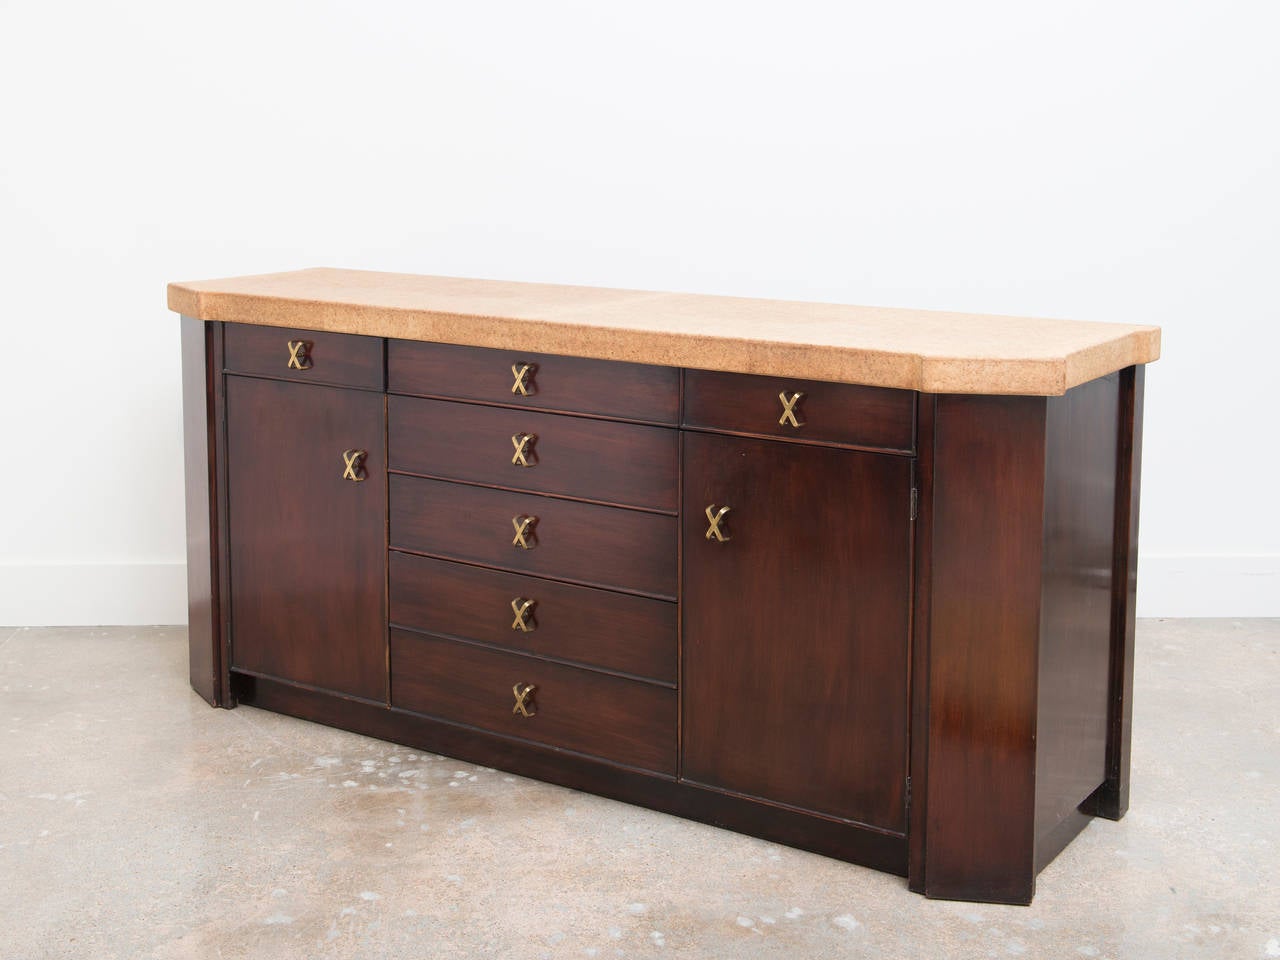 Highly stylized credenza or cabinet designed by Paul Frankl.  This cabinet exemplifies Frankl's fine Mid Century design detailing elegant hardware combining materials such as cork and mahogany with brass accents.